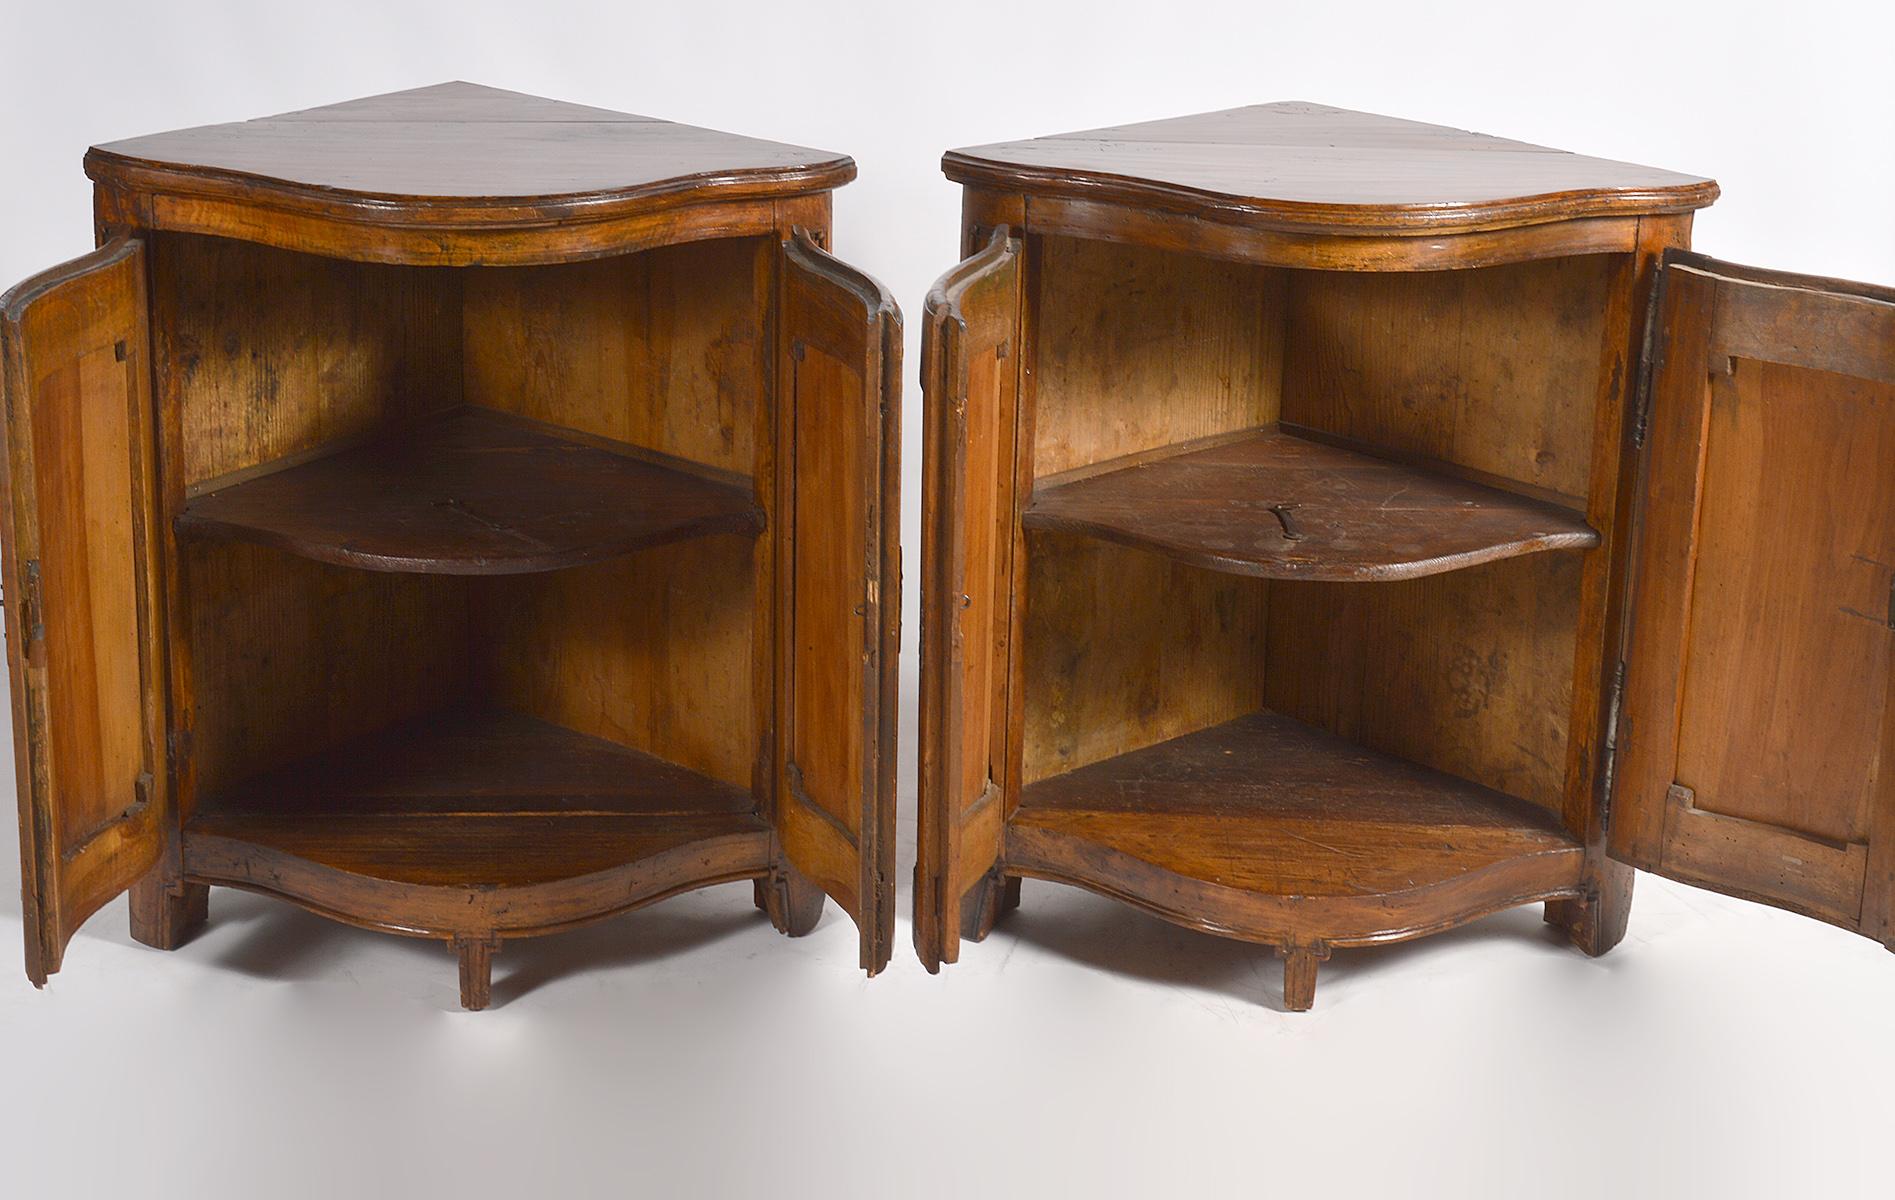 Iron Pair of Early 19th Century Carved French Provincial Serpentine Corner Cabinets